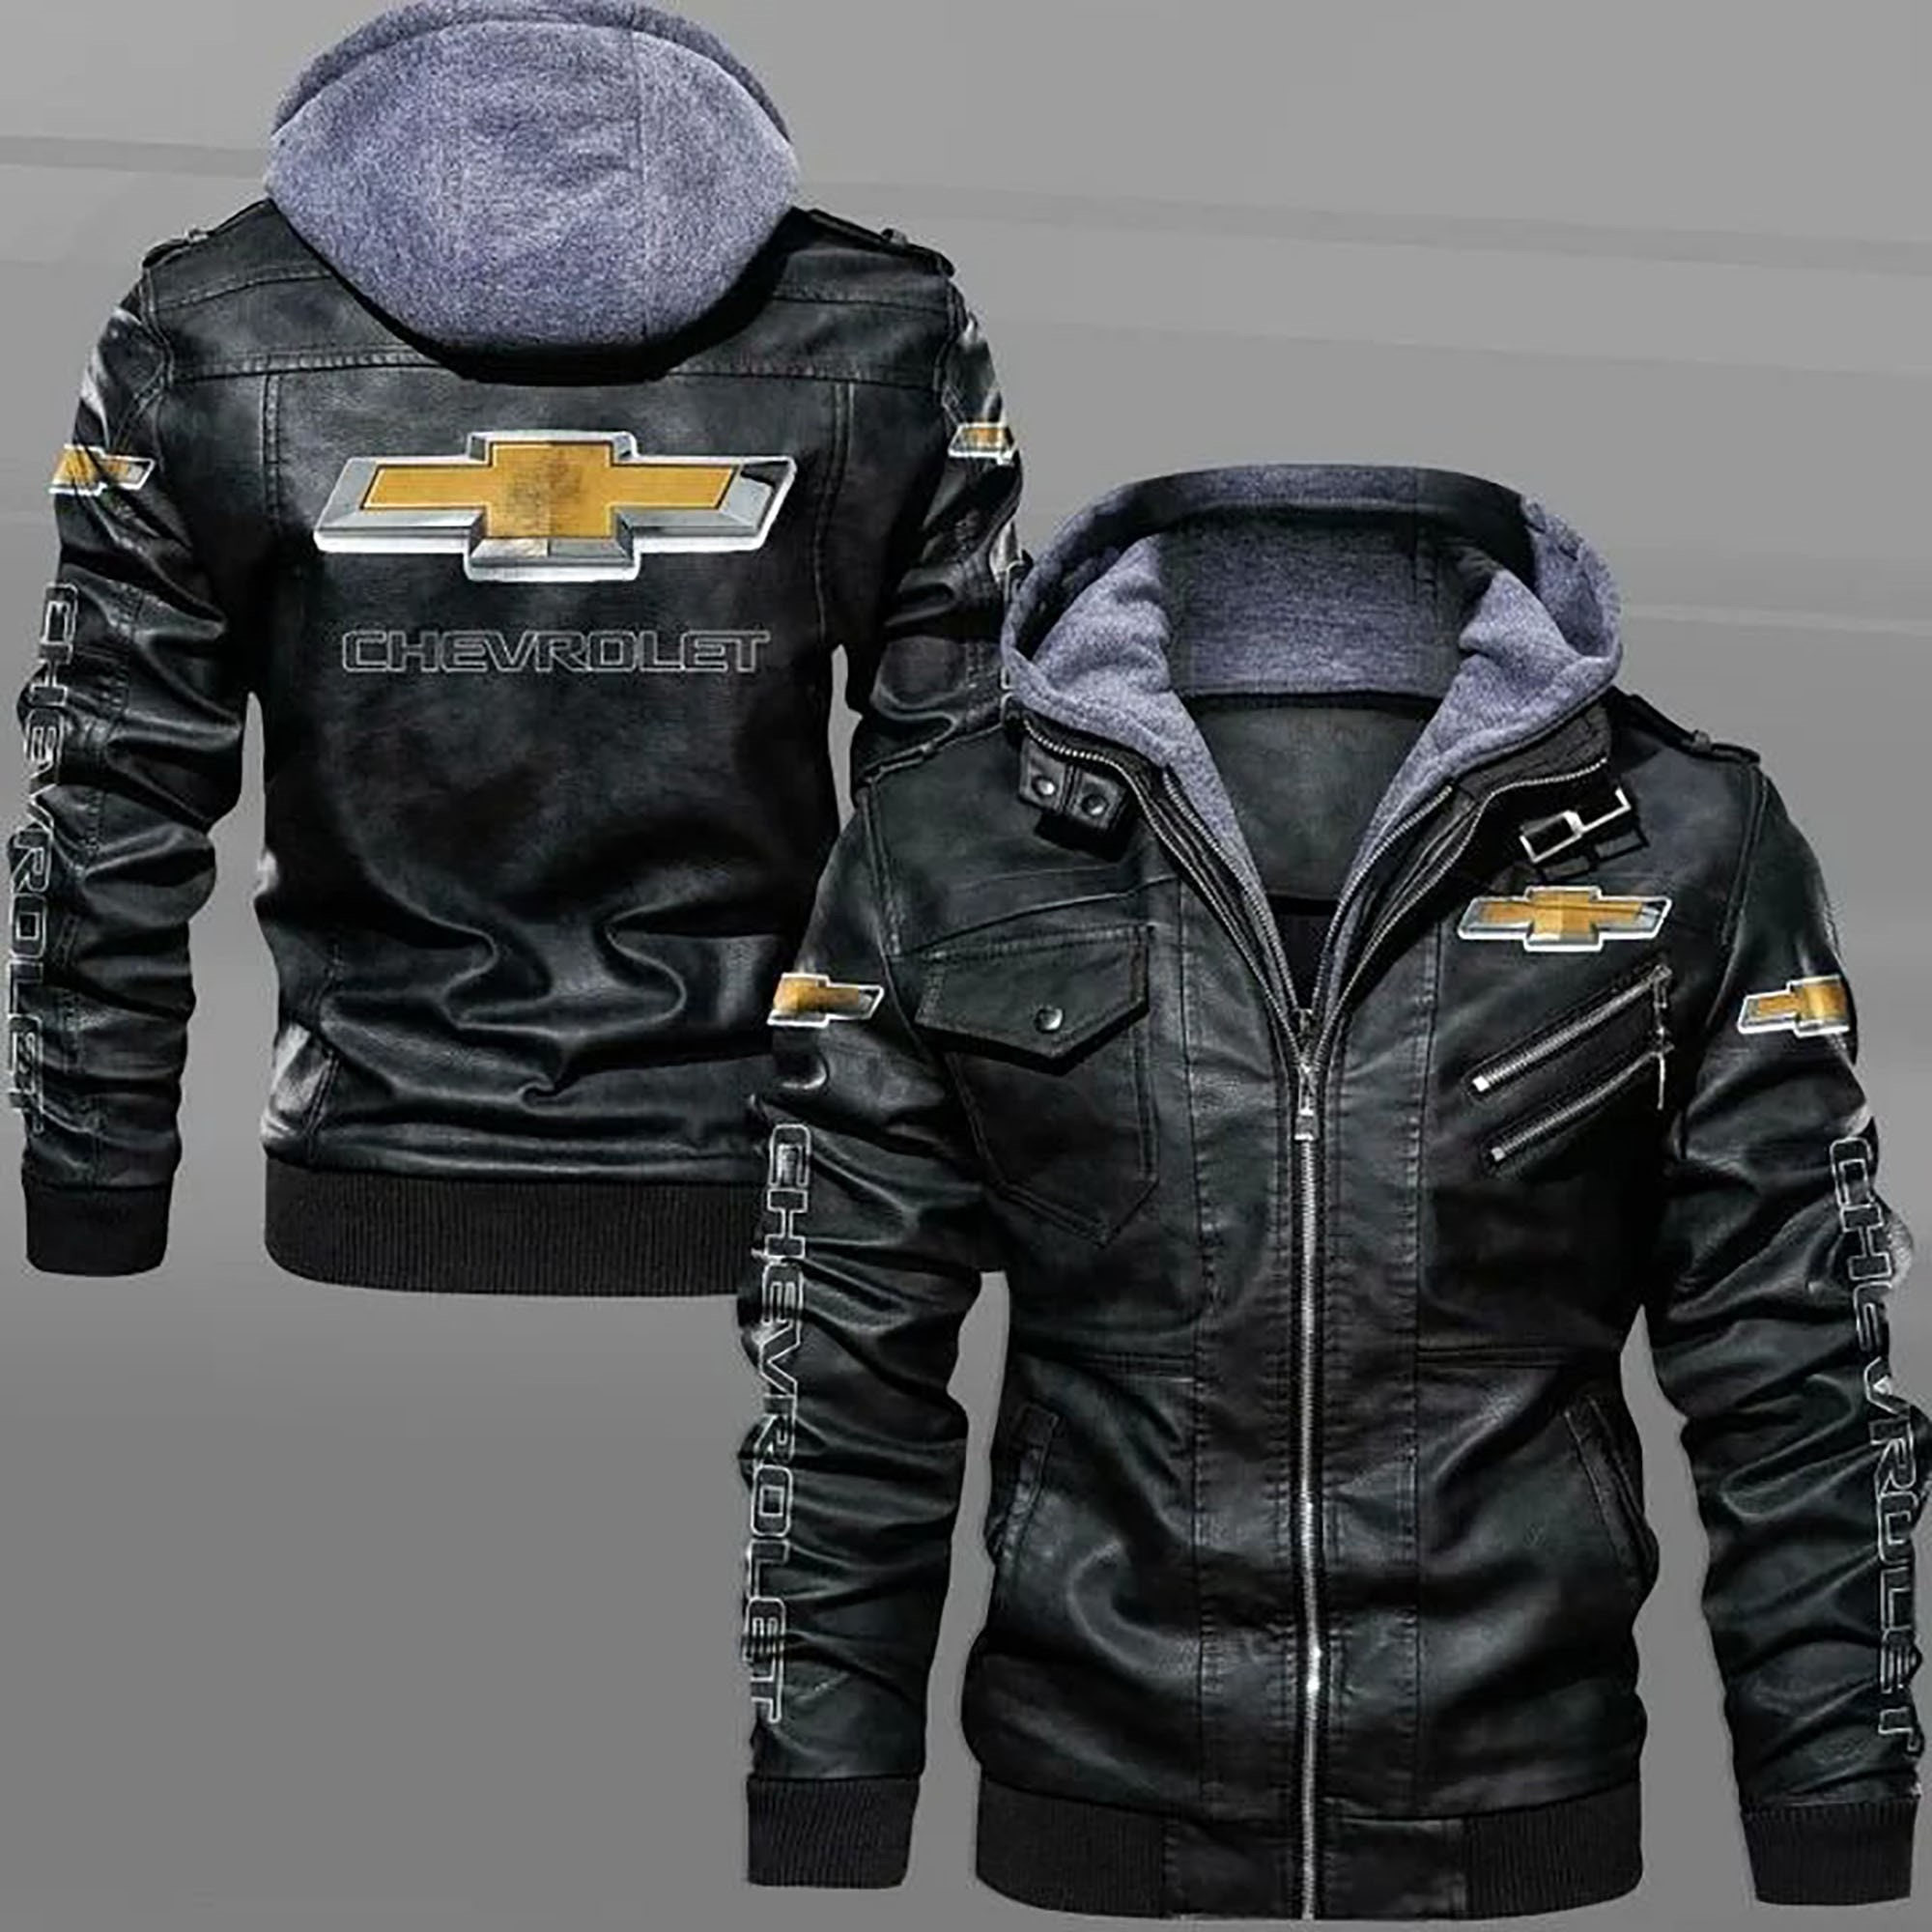 These Amazing Leather Jacket will add to the appeal of your outfit 451